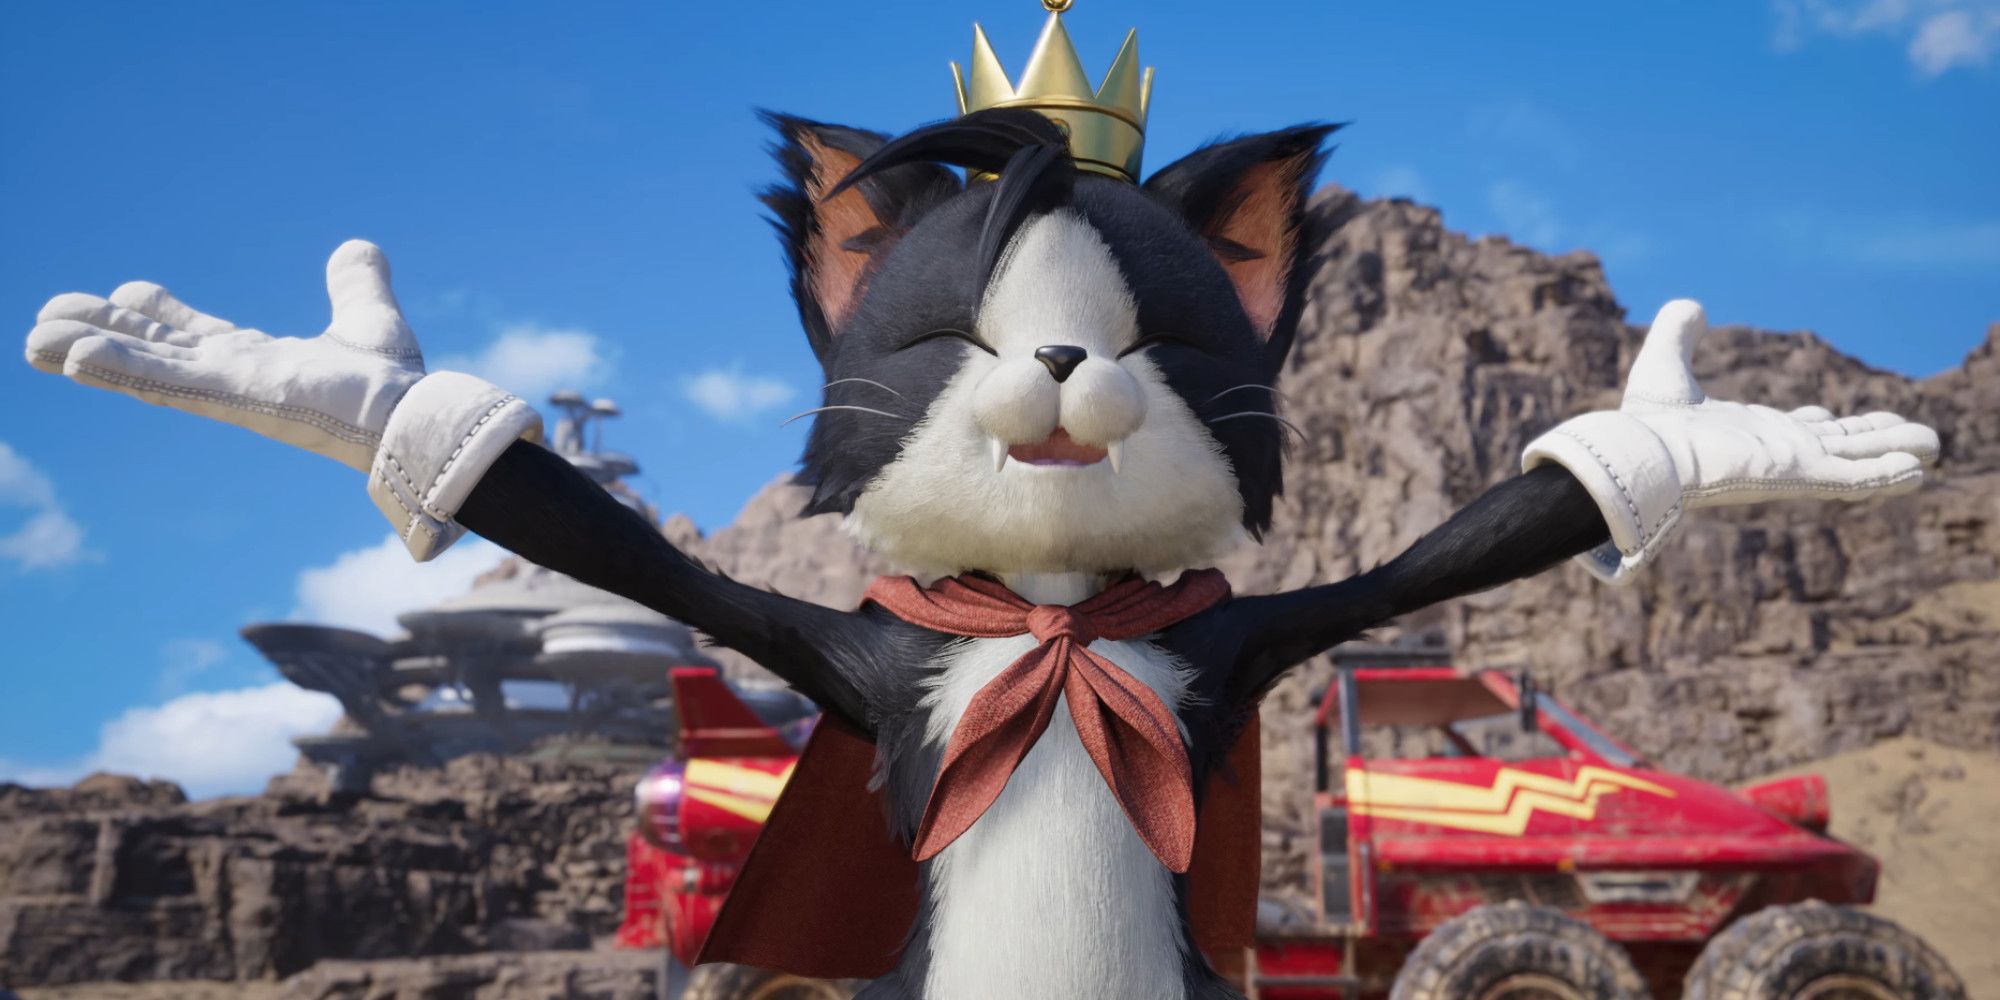 Cait Sith with his arms out in front of a vehicle in Final Fantasy 7 Rebirth